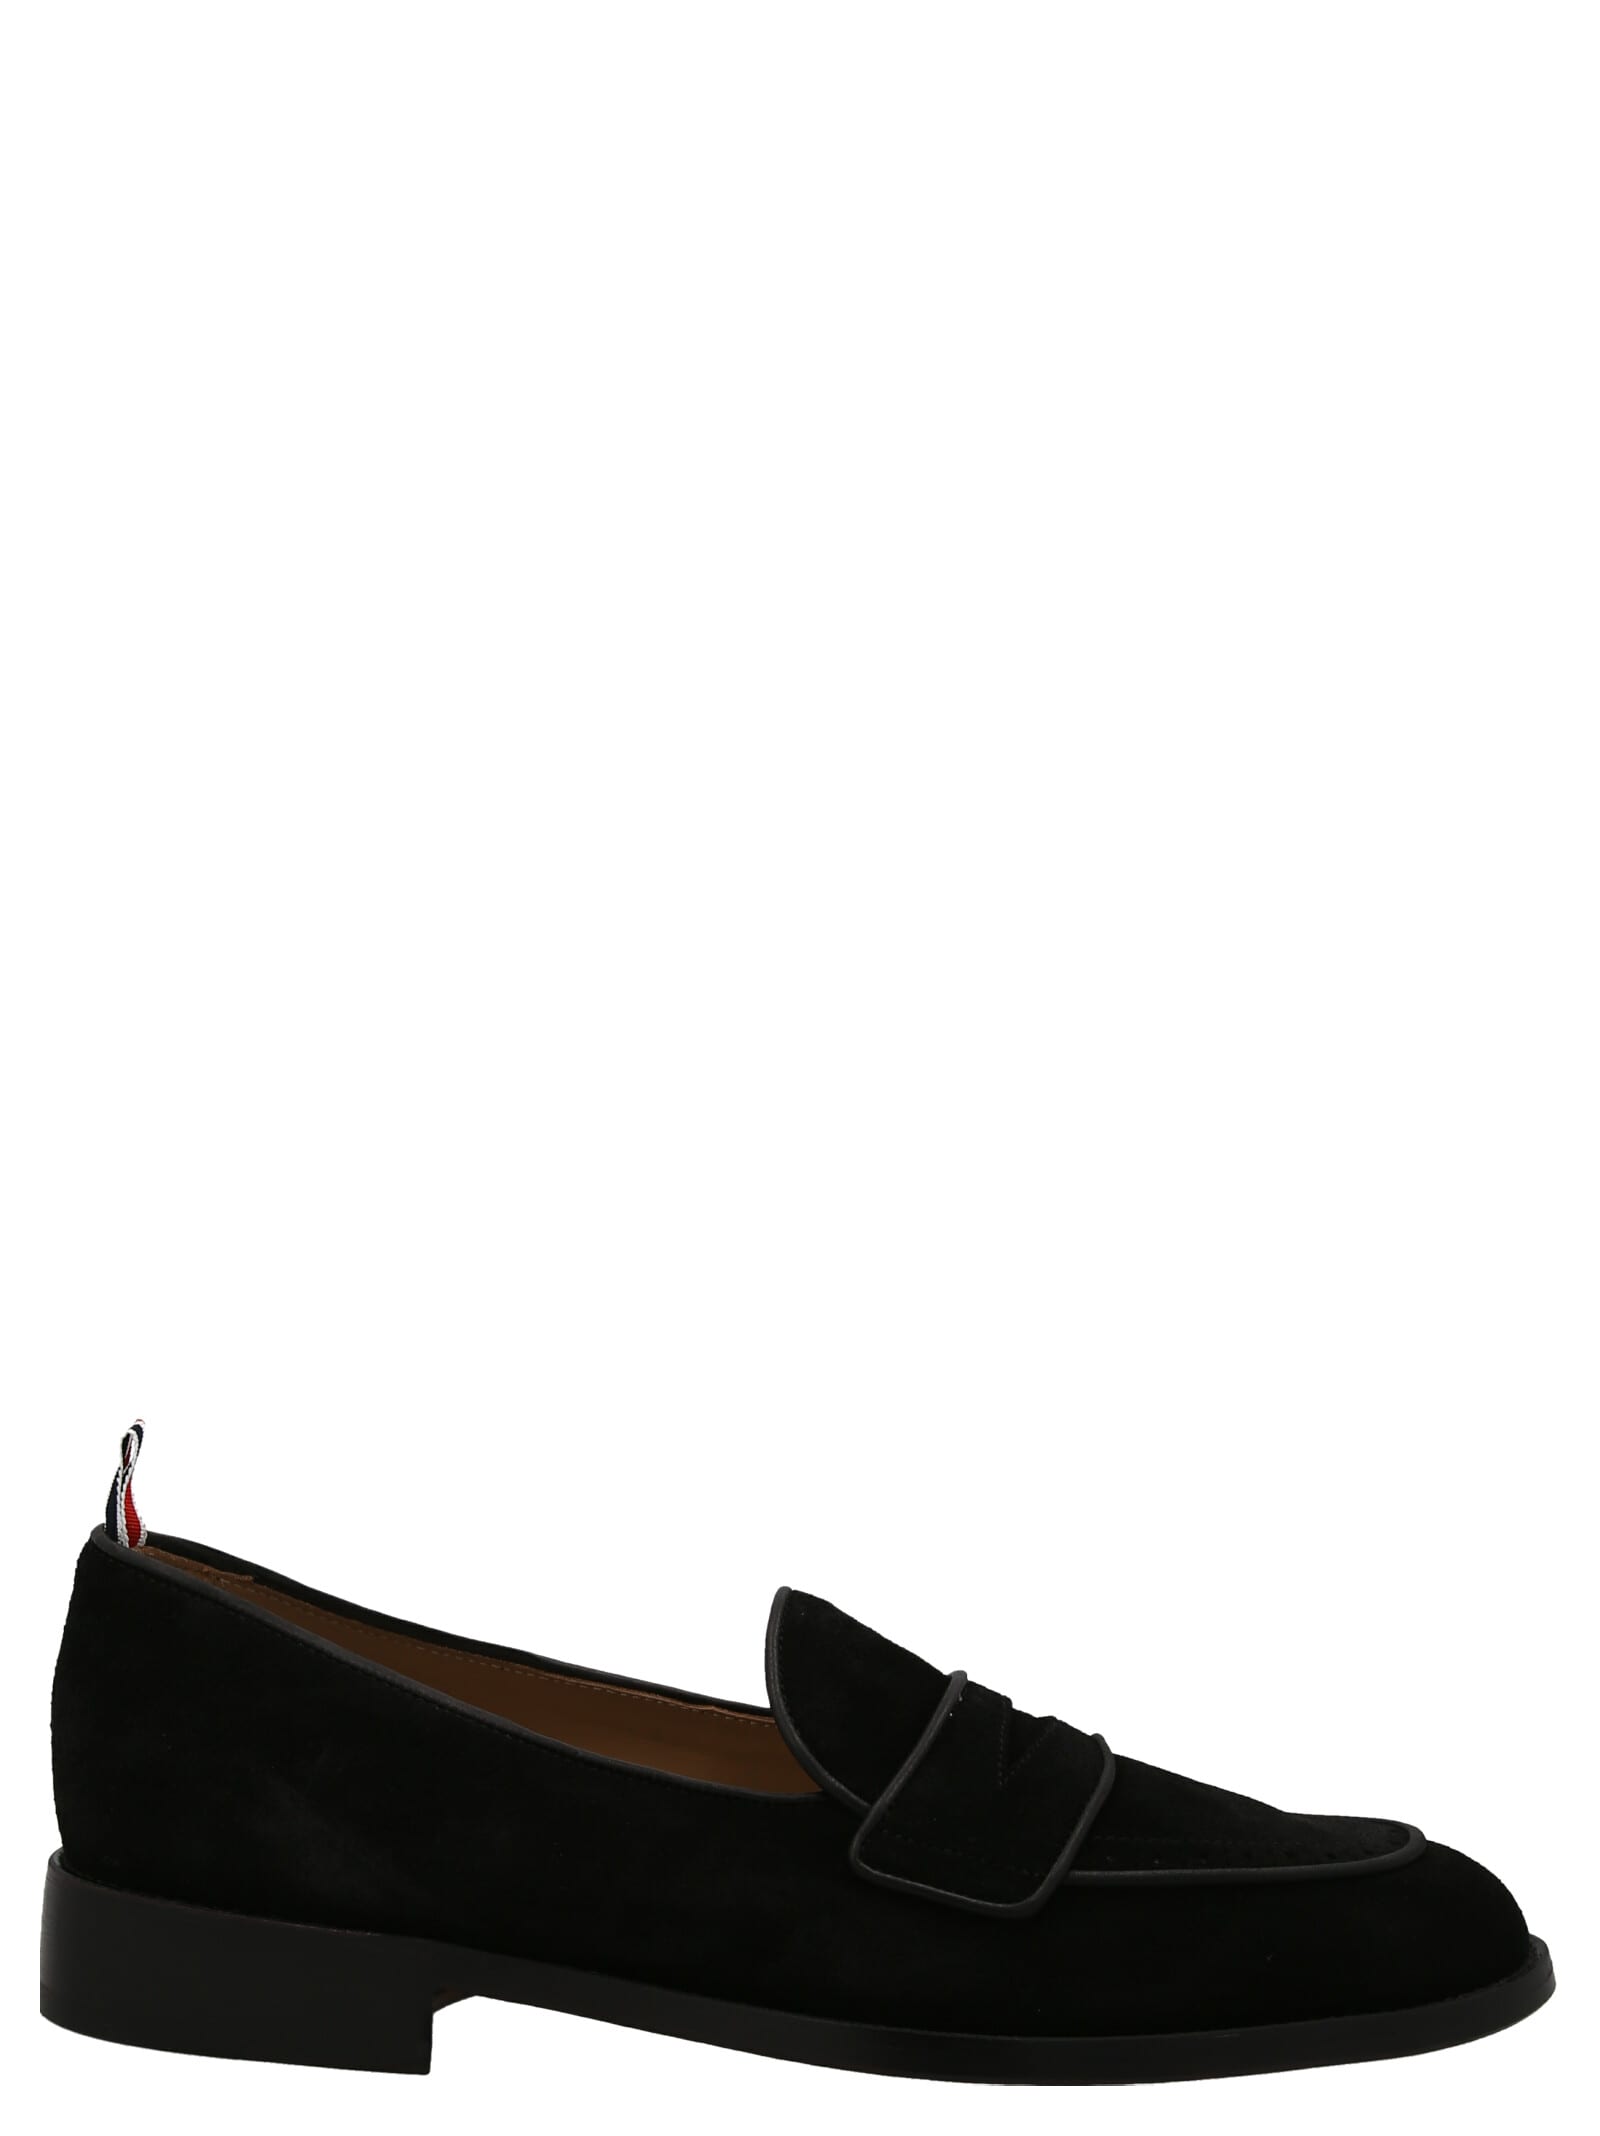 Thom Browne Suede Loafers